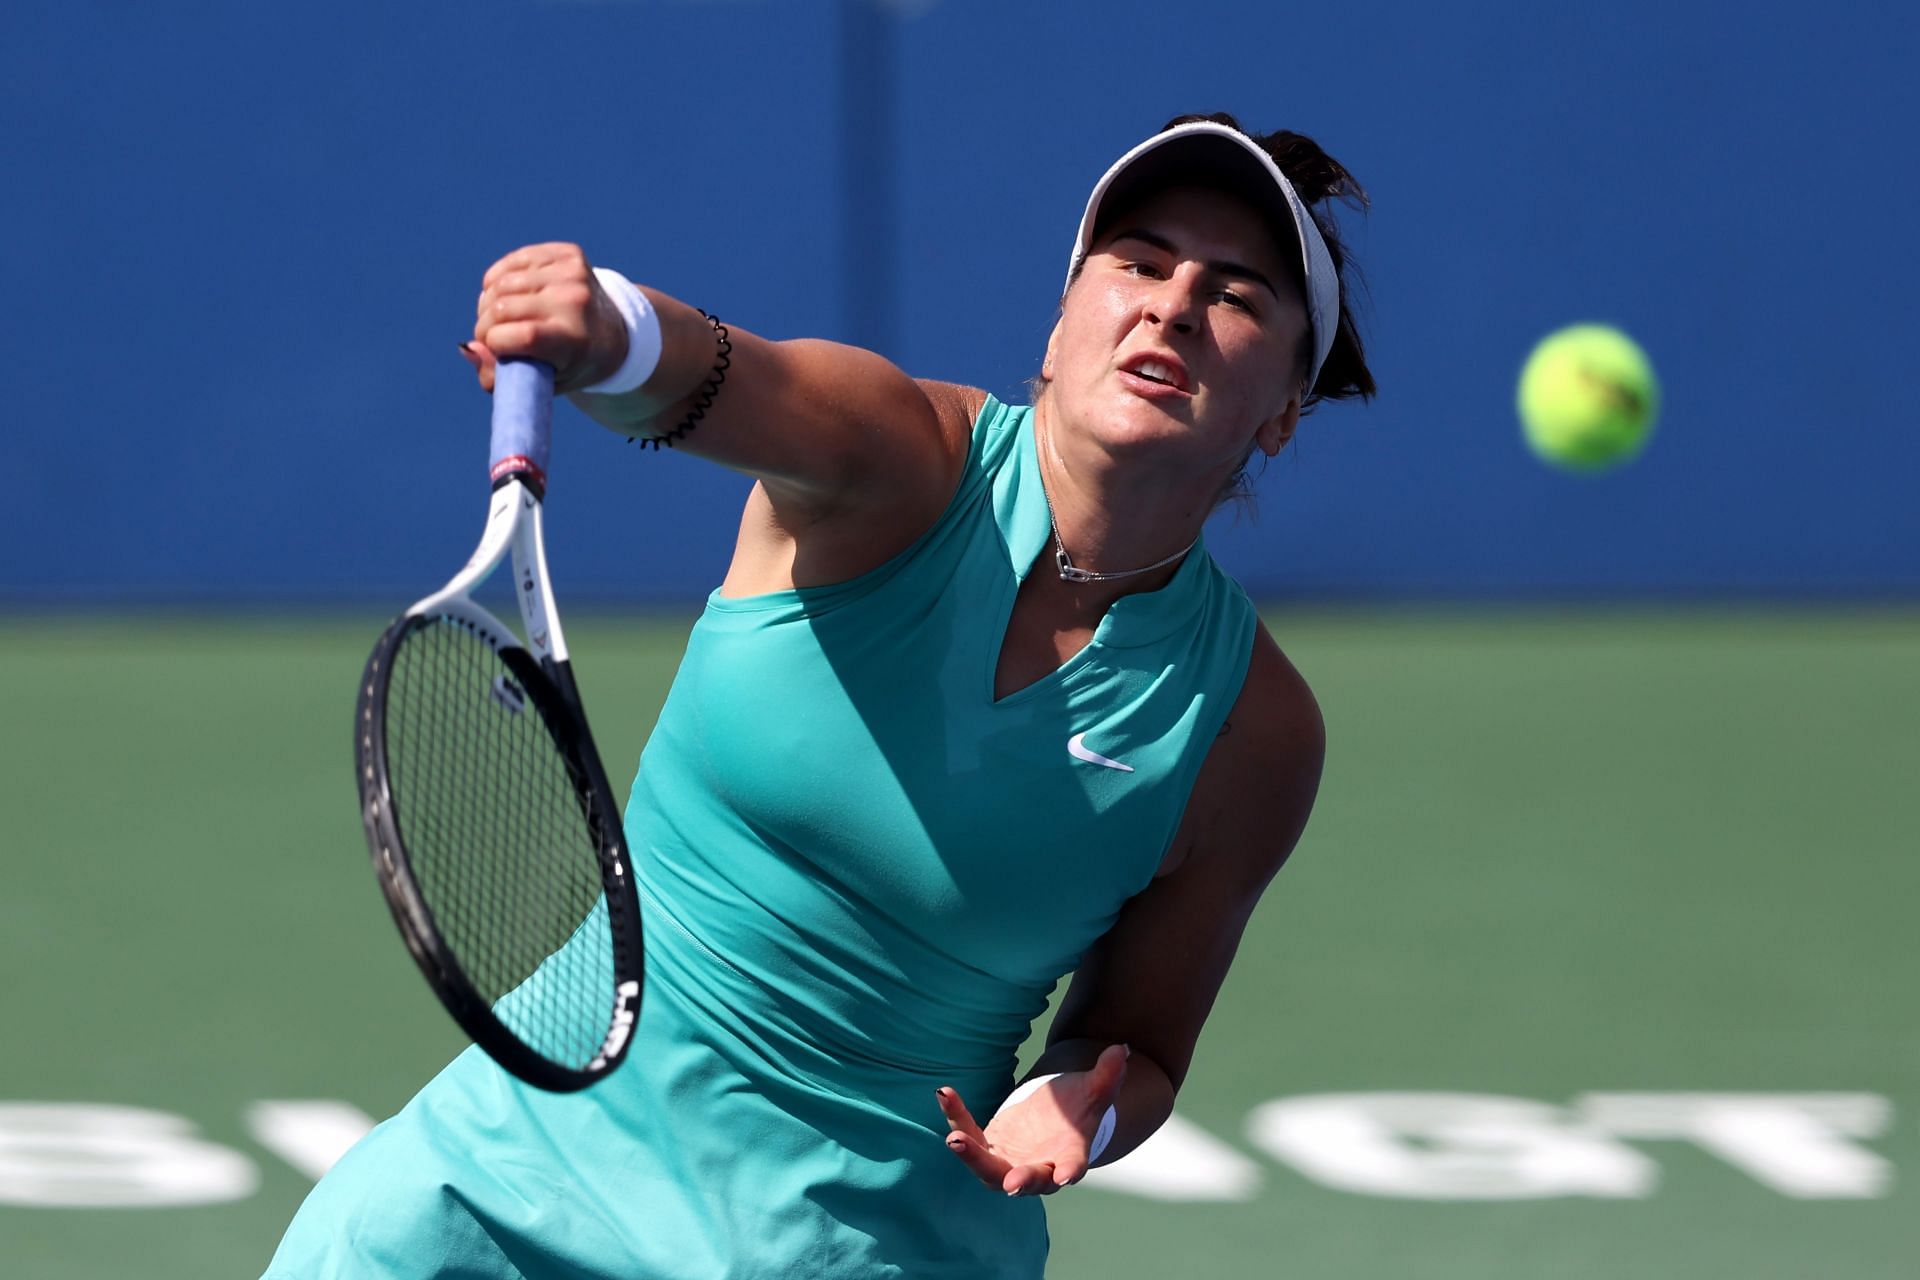 Bianca Andreescu at the Citi Open - Day 3